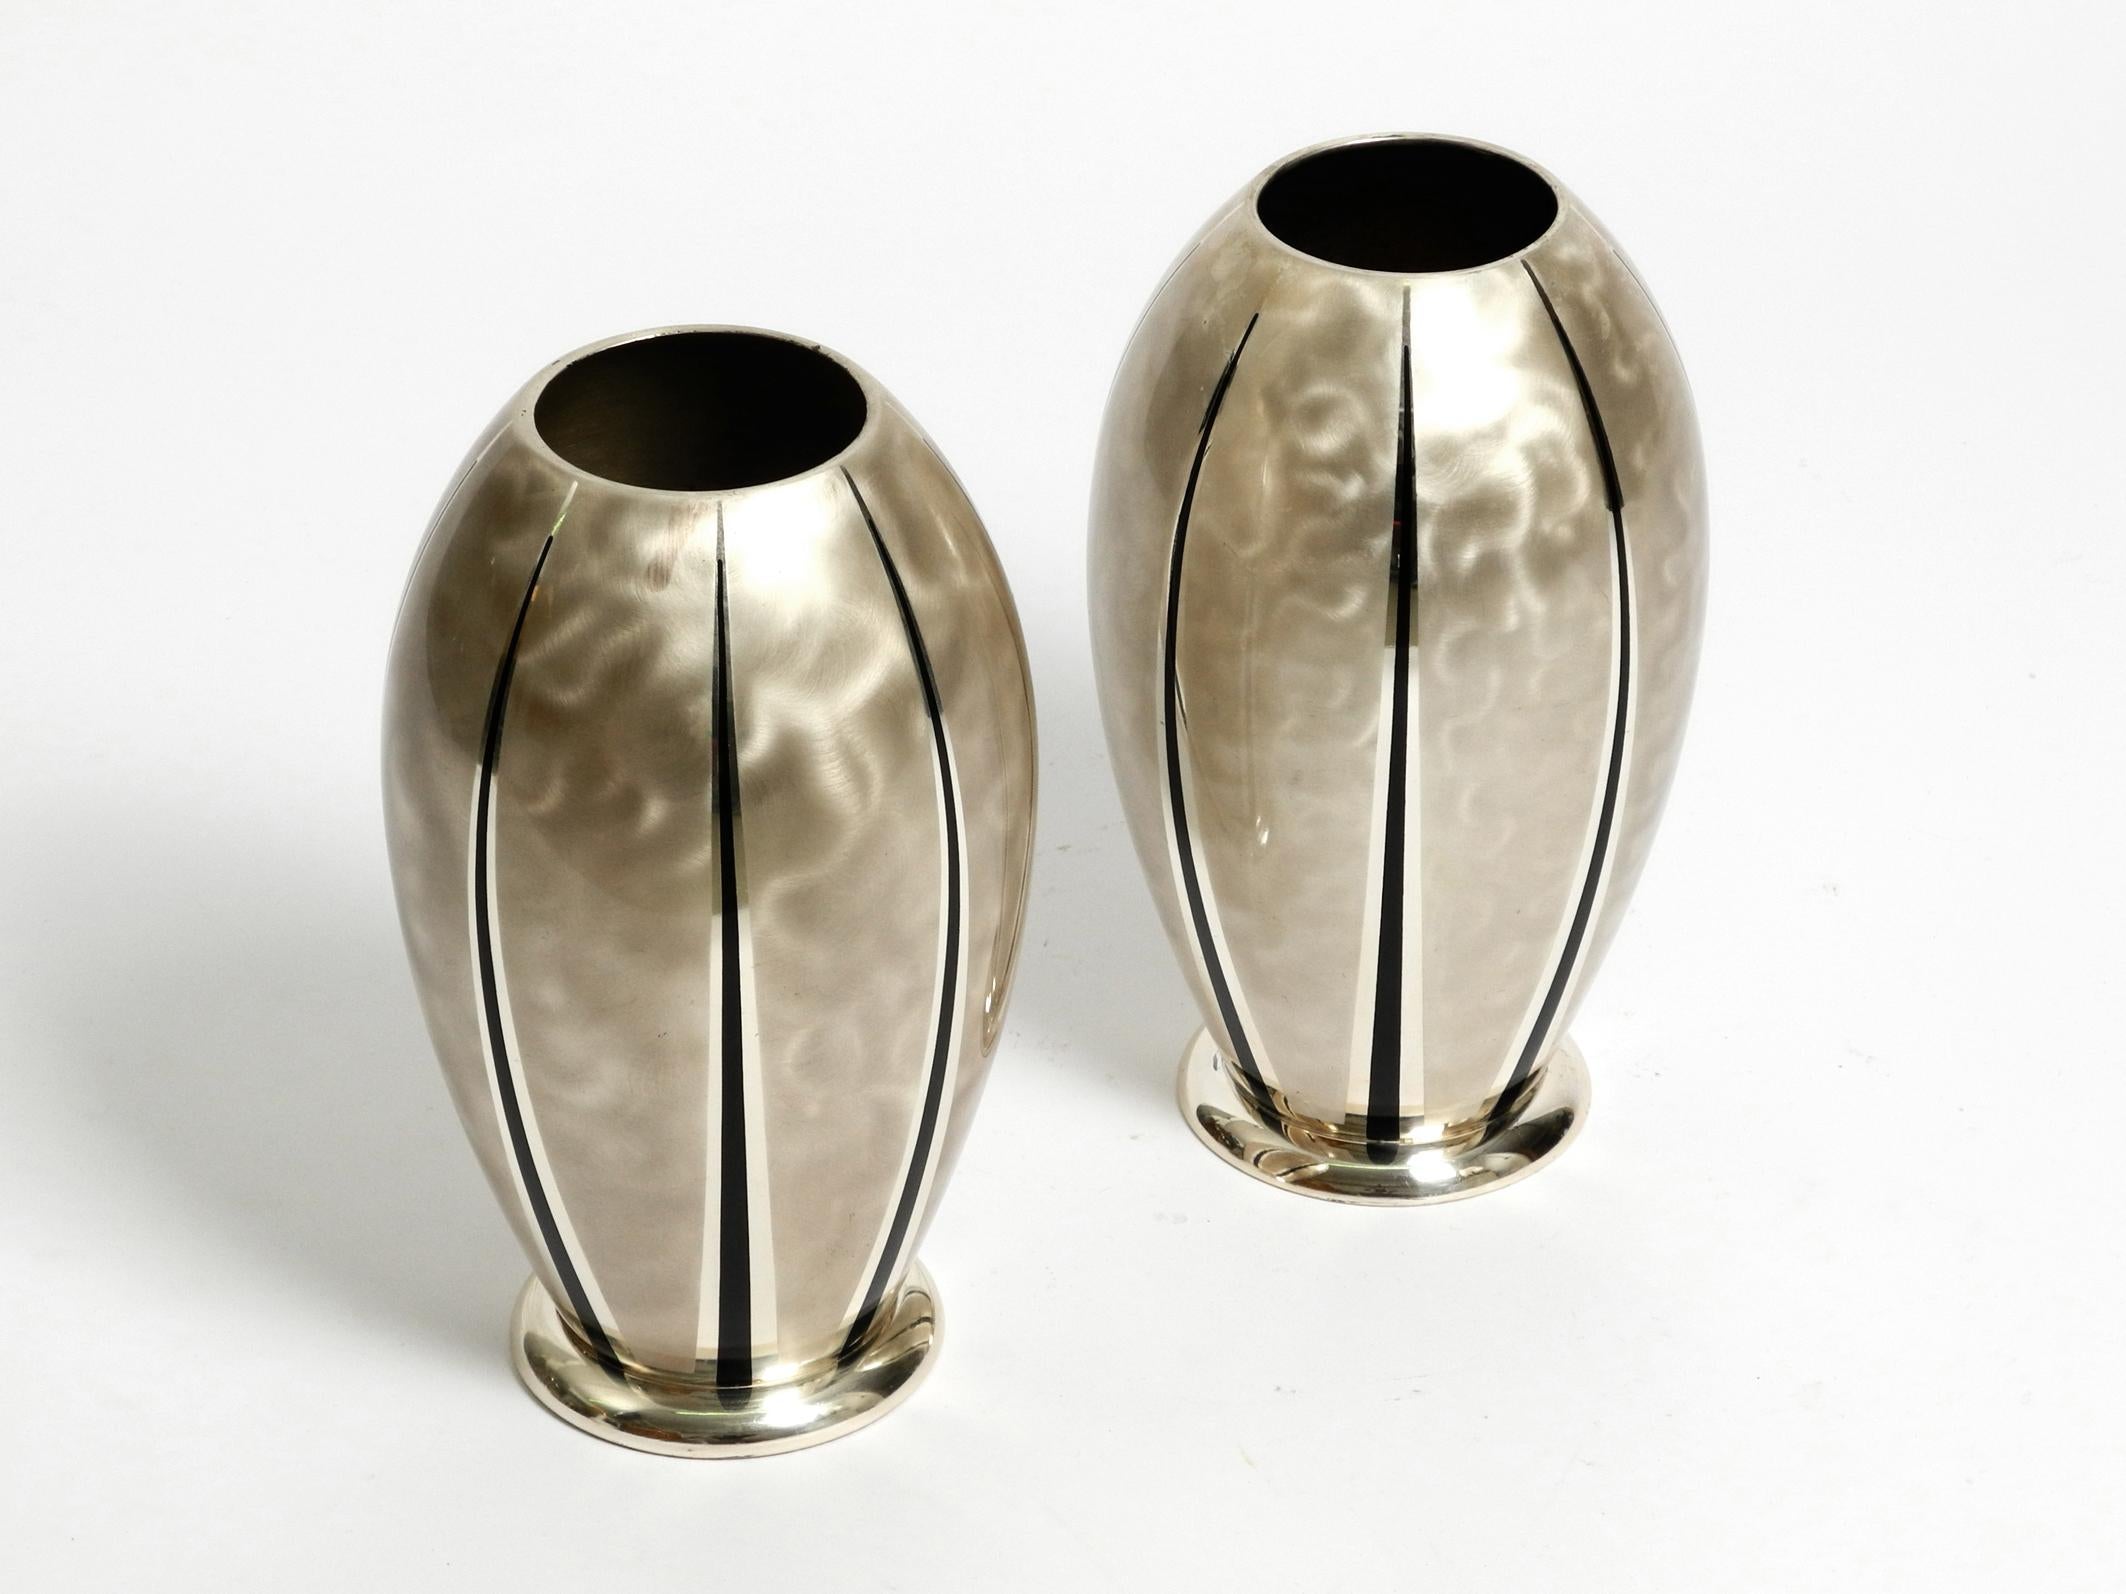 Pair of large silver-plated brass table vases from WMF Ikora. Made in the 1950s. Made in Germany.
Beautiful Mid Century design. The silver is matt polished with black stripes.
Both vases are identical in shape and size.
Very well preserved with no